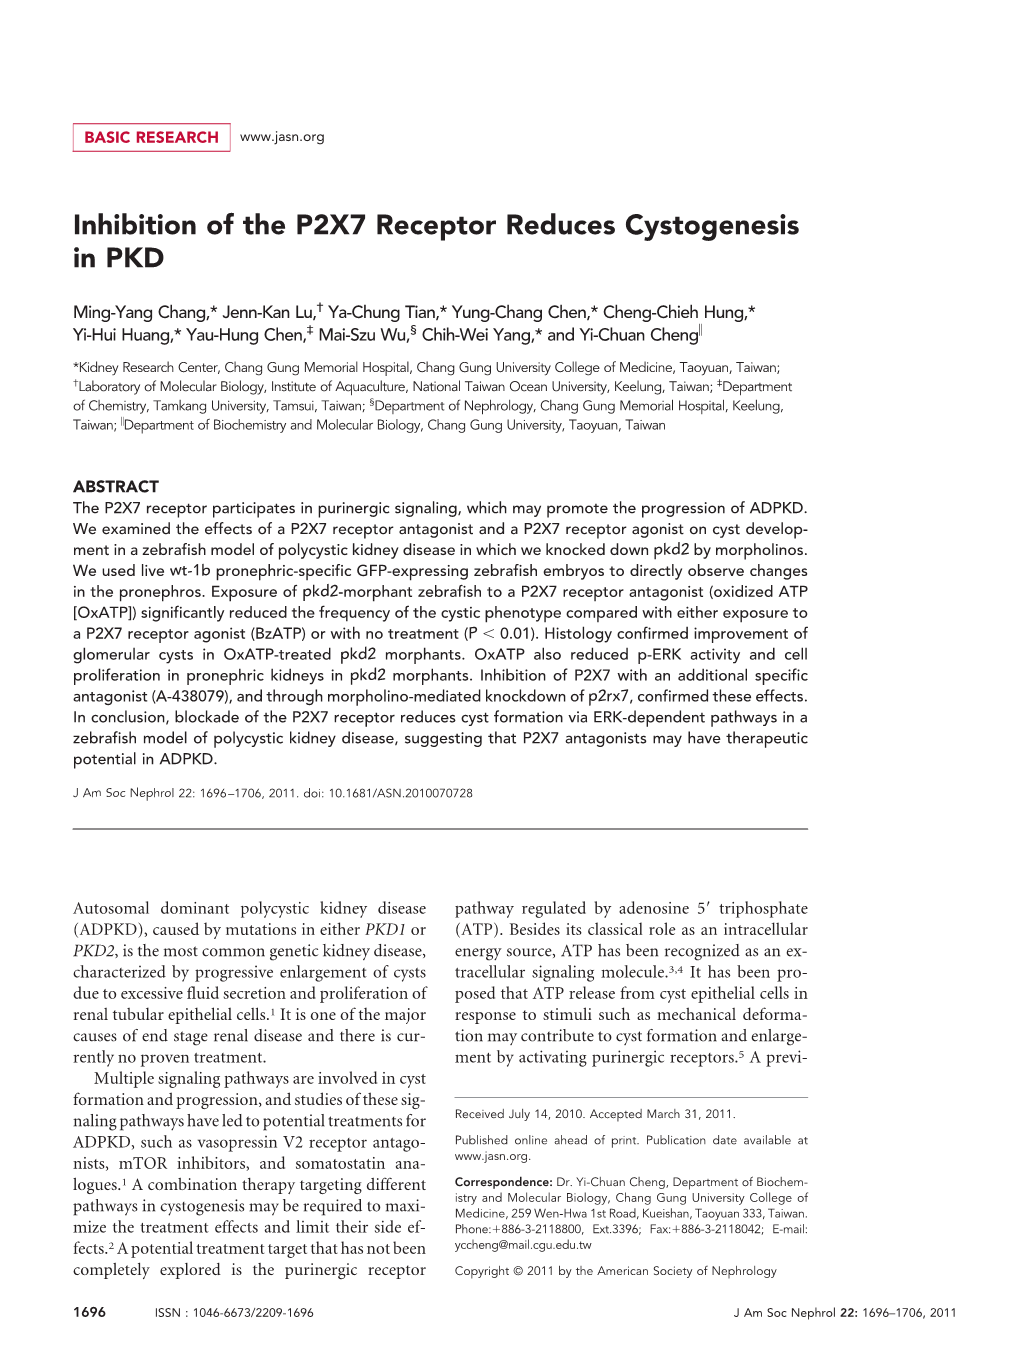 Inhibition of the P2X7 Receptor Reduces Cystogenesis in PKD